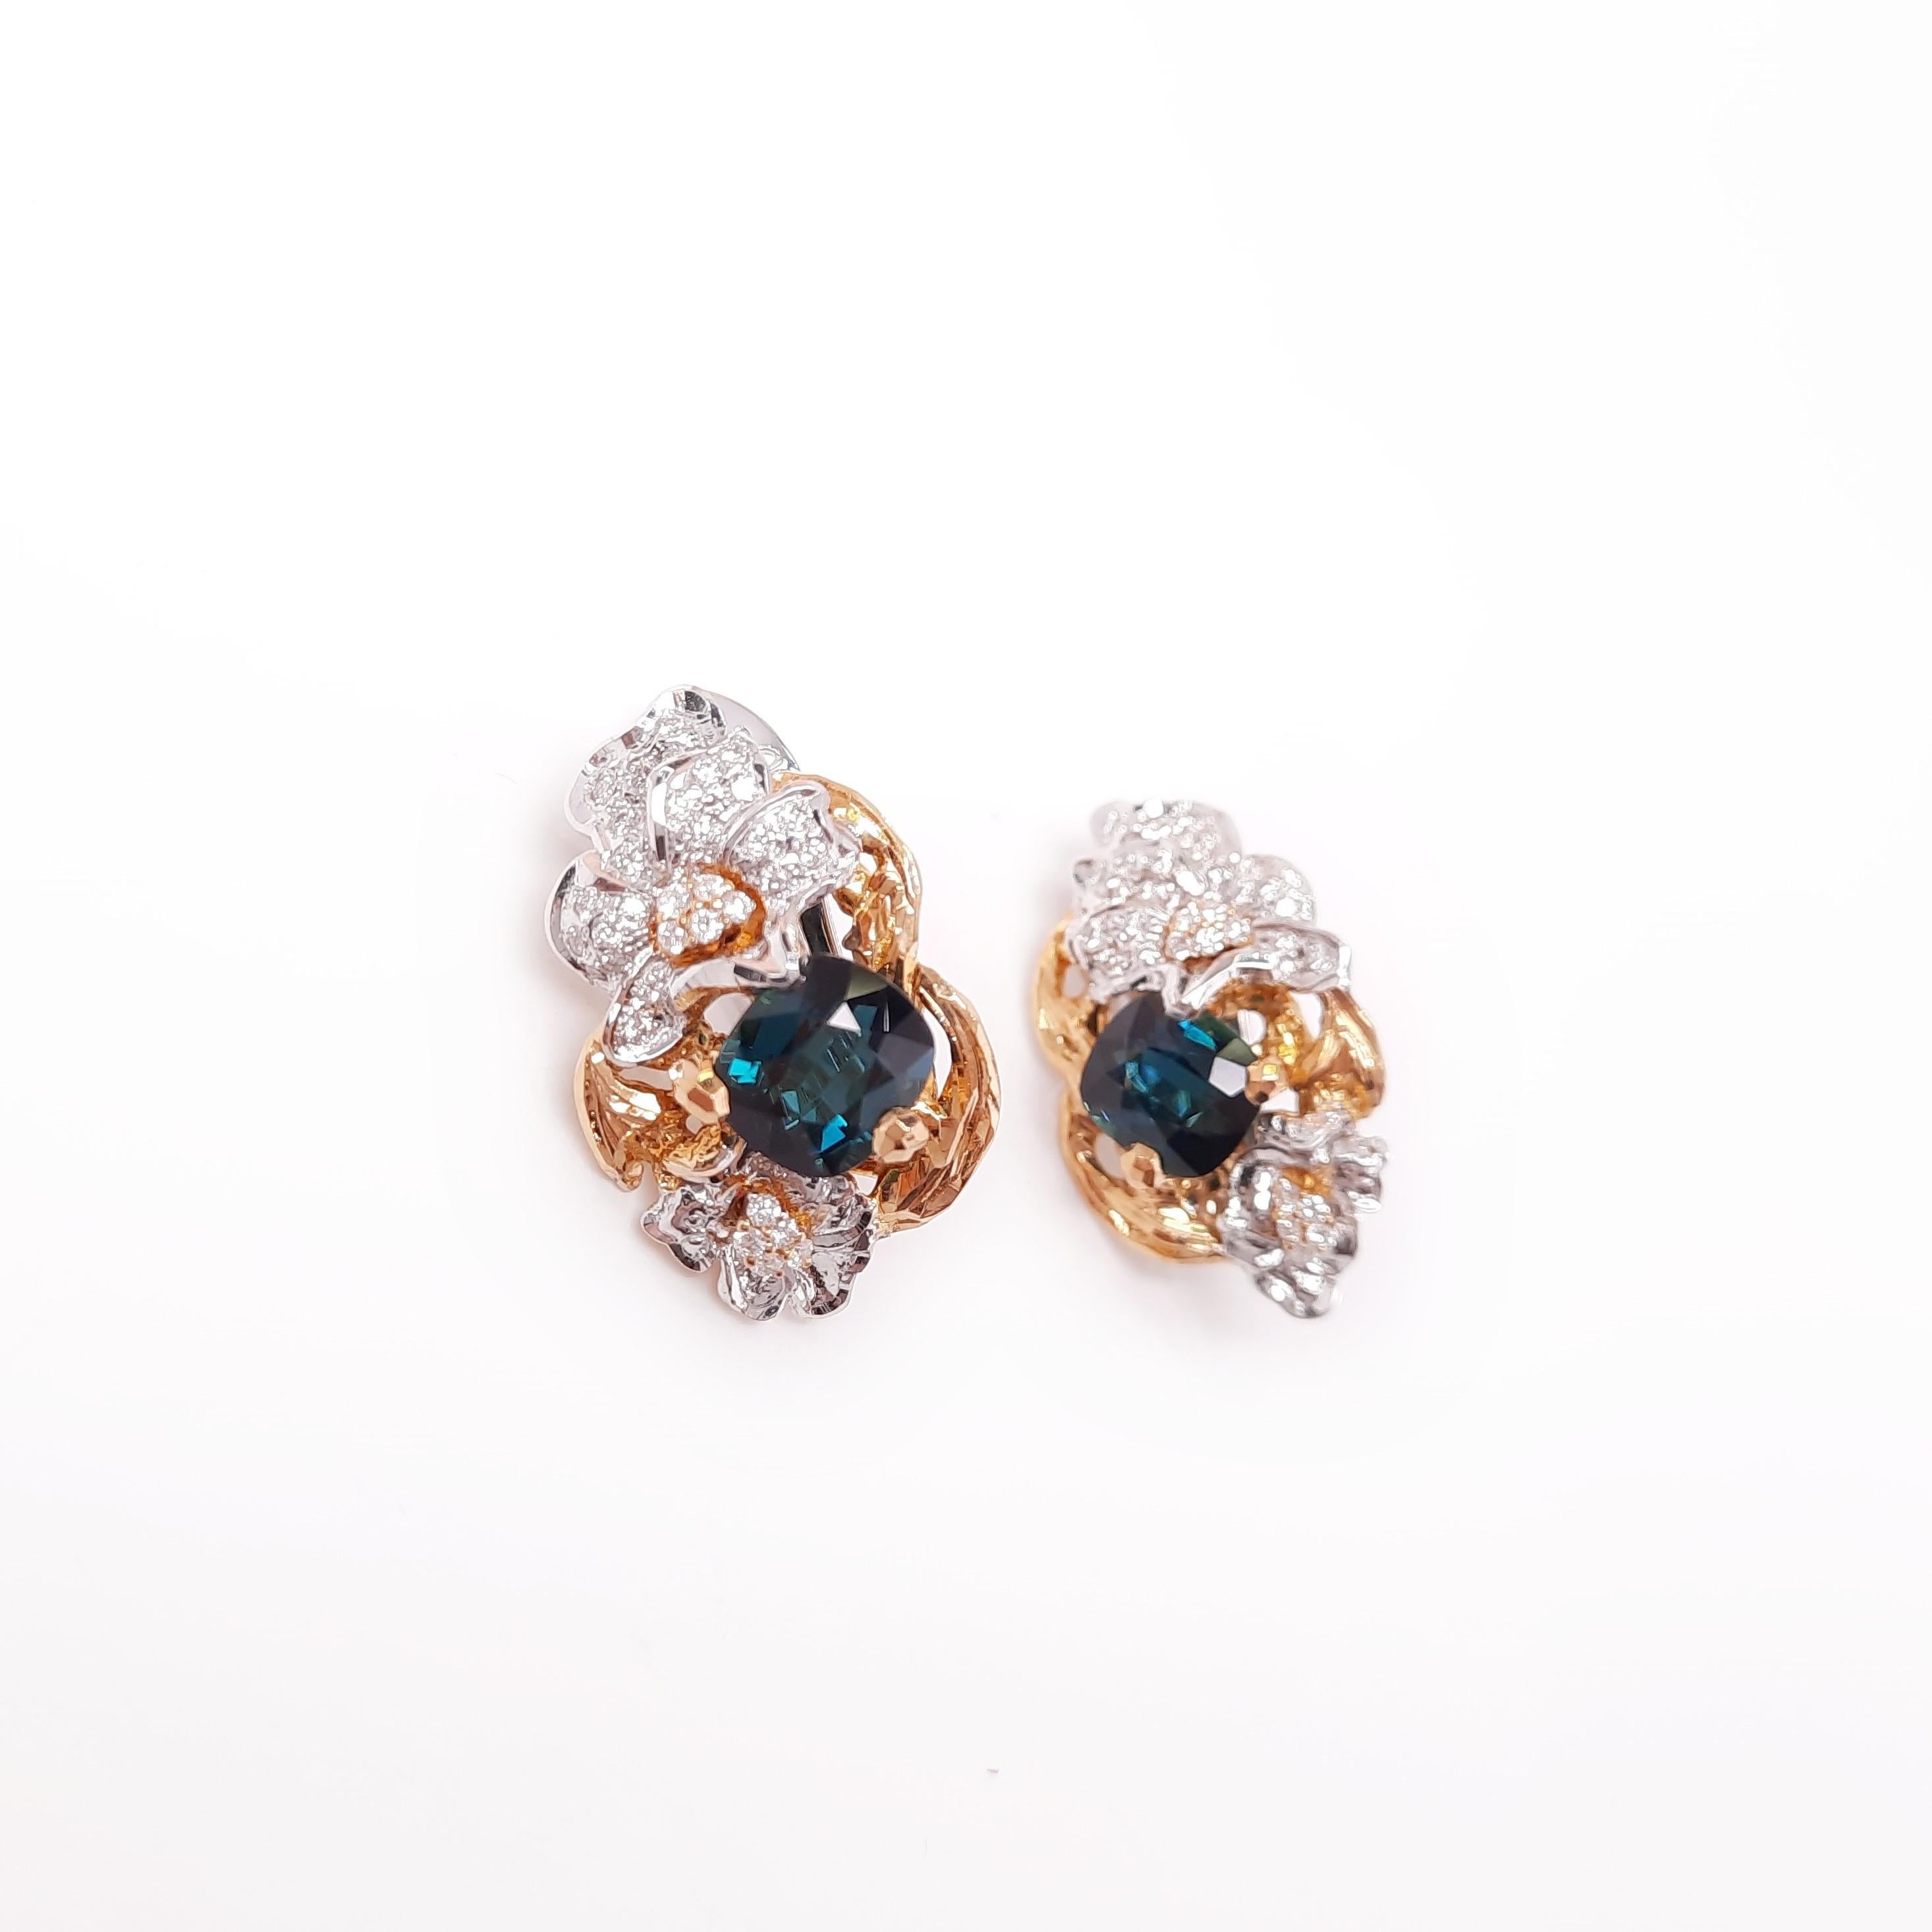 Inspired by Impressionism, MOISEIKIN® has created a blooming flower earrings  in tridimensional manner. Vivid and flawless indigo tourmalines are even more enhanced by the combination of yellow and white gold floral filigree, embedded with sparkling